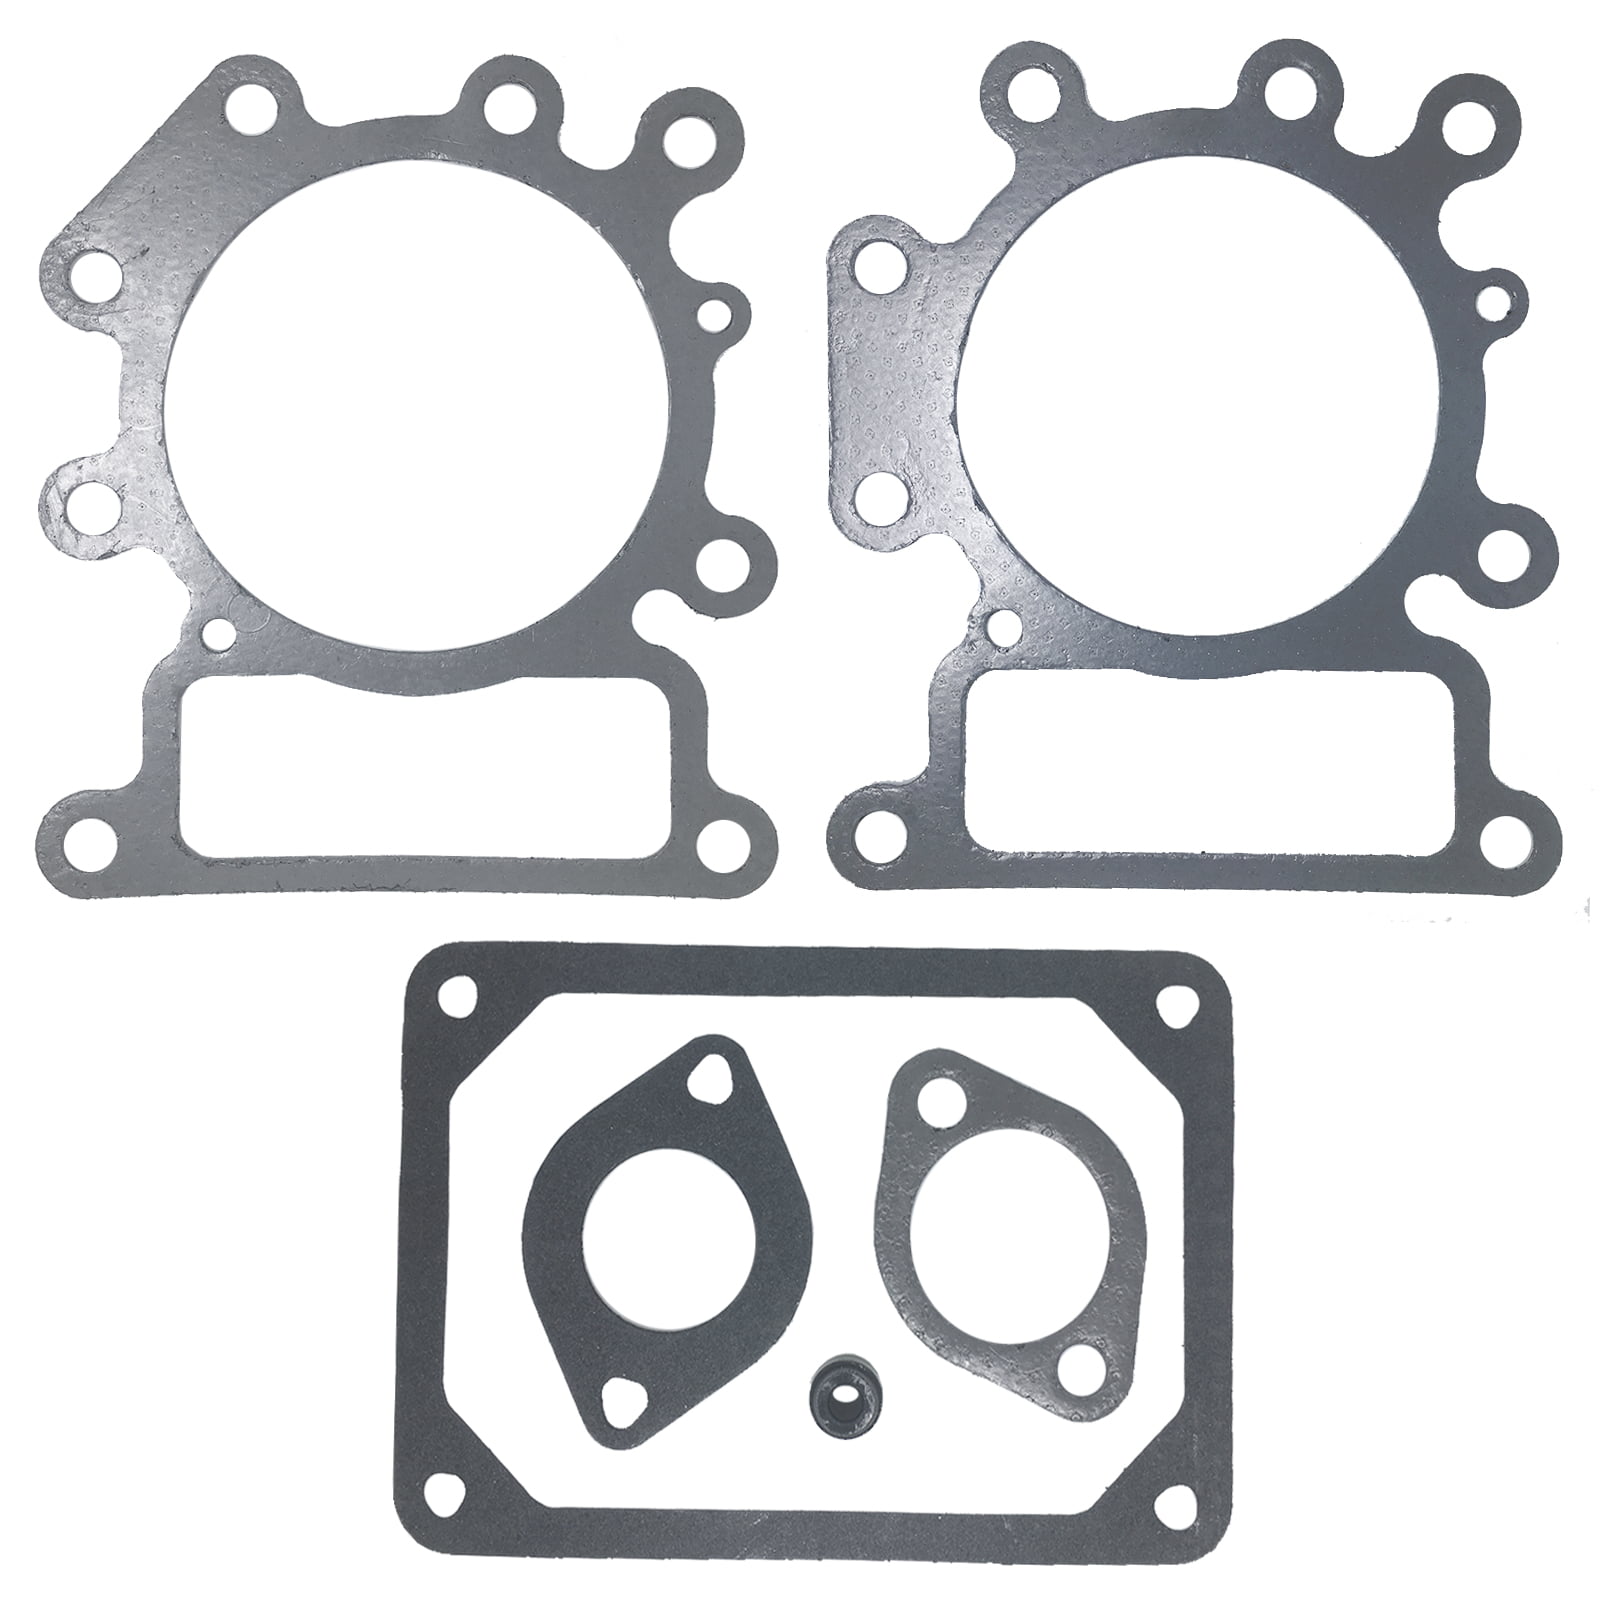 Details about   Valve Gasket Set For Briggs & Stratton 794152 Replaces 690190